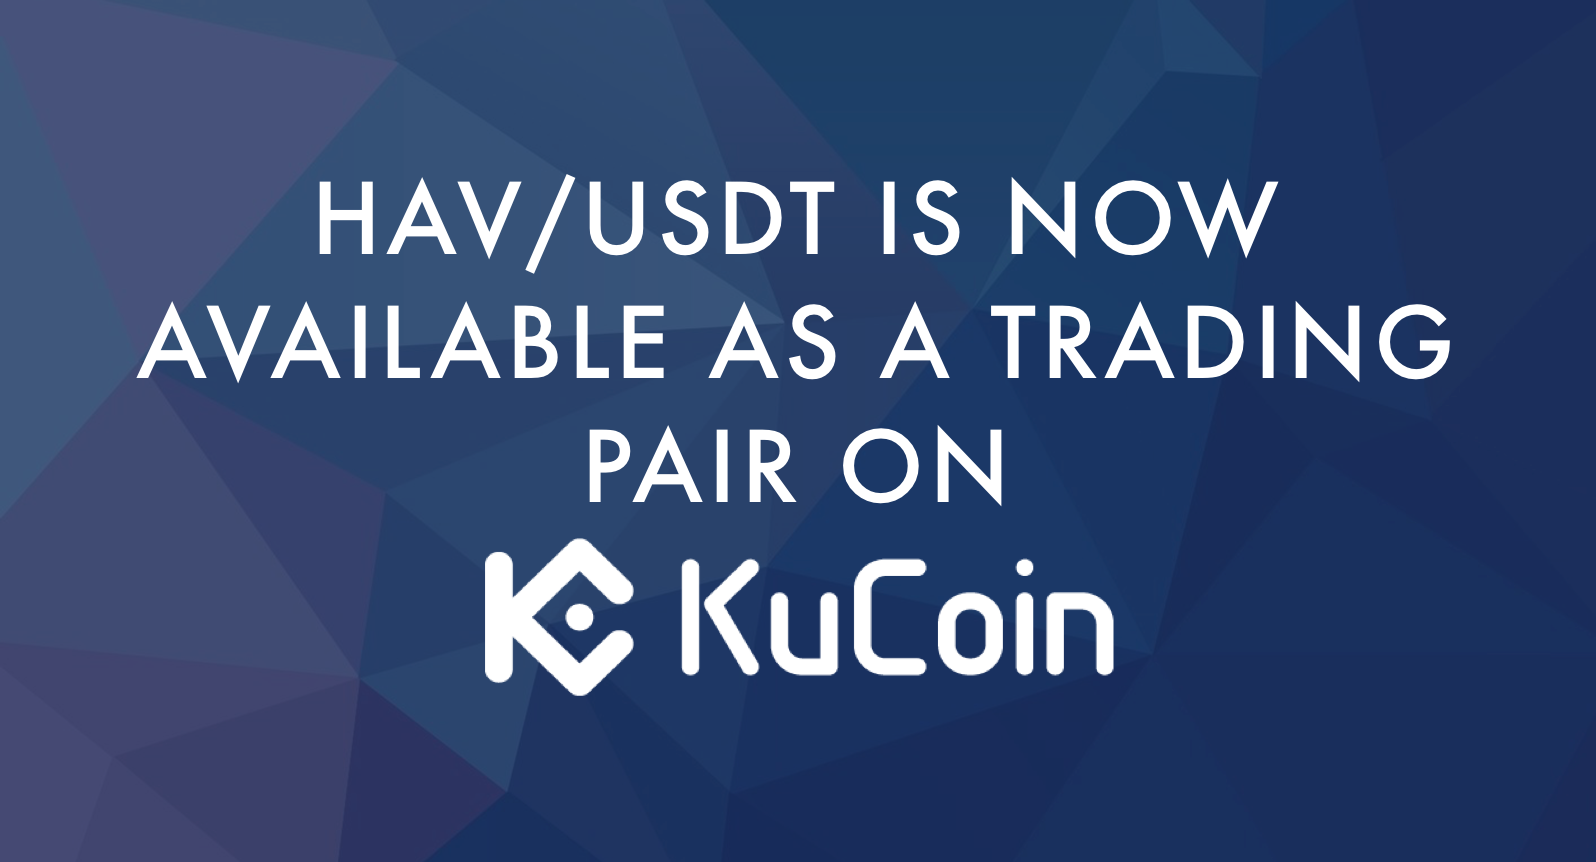 HAV/USDT trading pair is now available on KuCoin